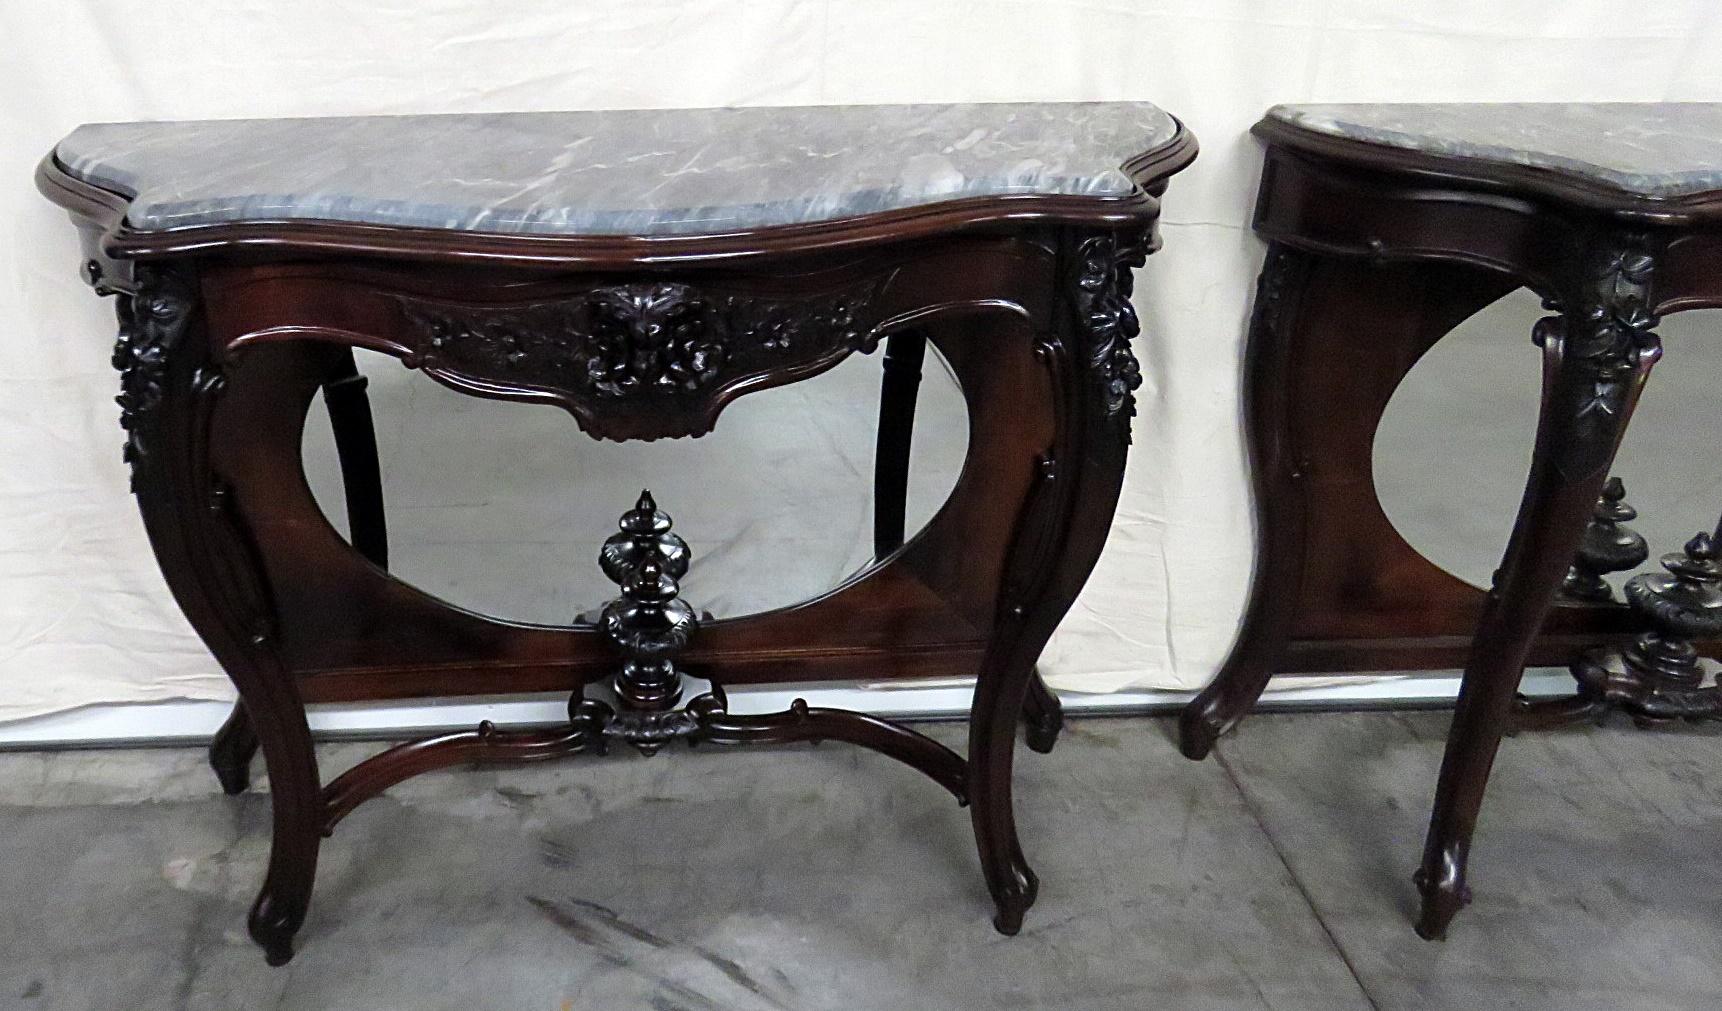 Pair of rosewood marble top, mirrored console tables with matching mirrors. The console tables measure 37